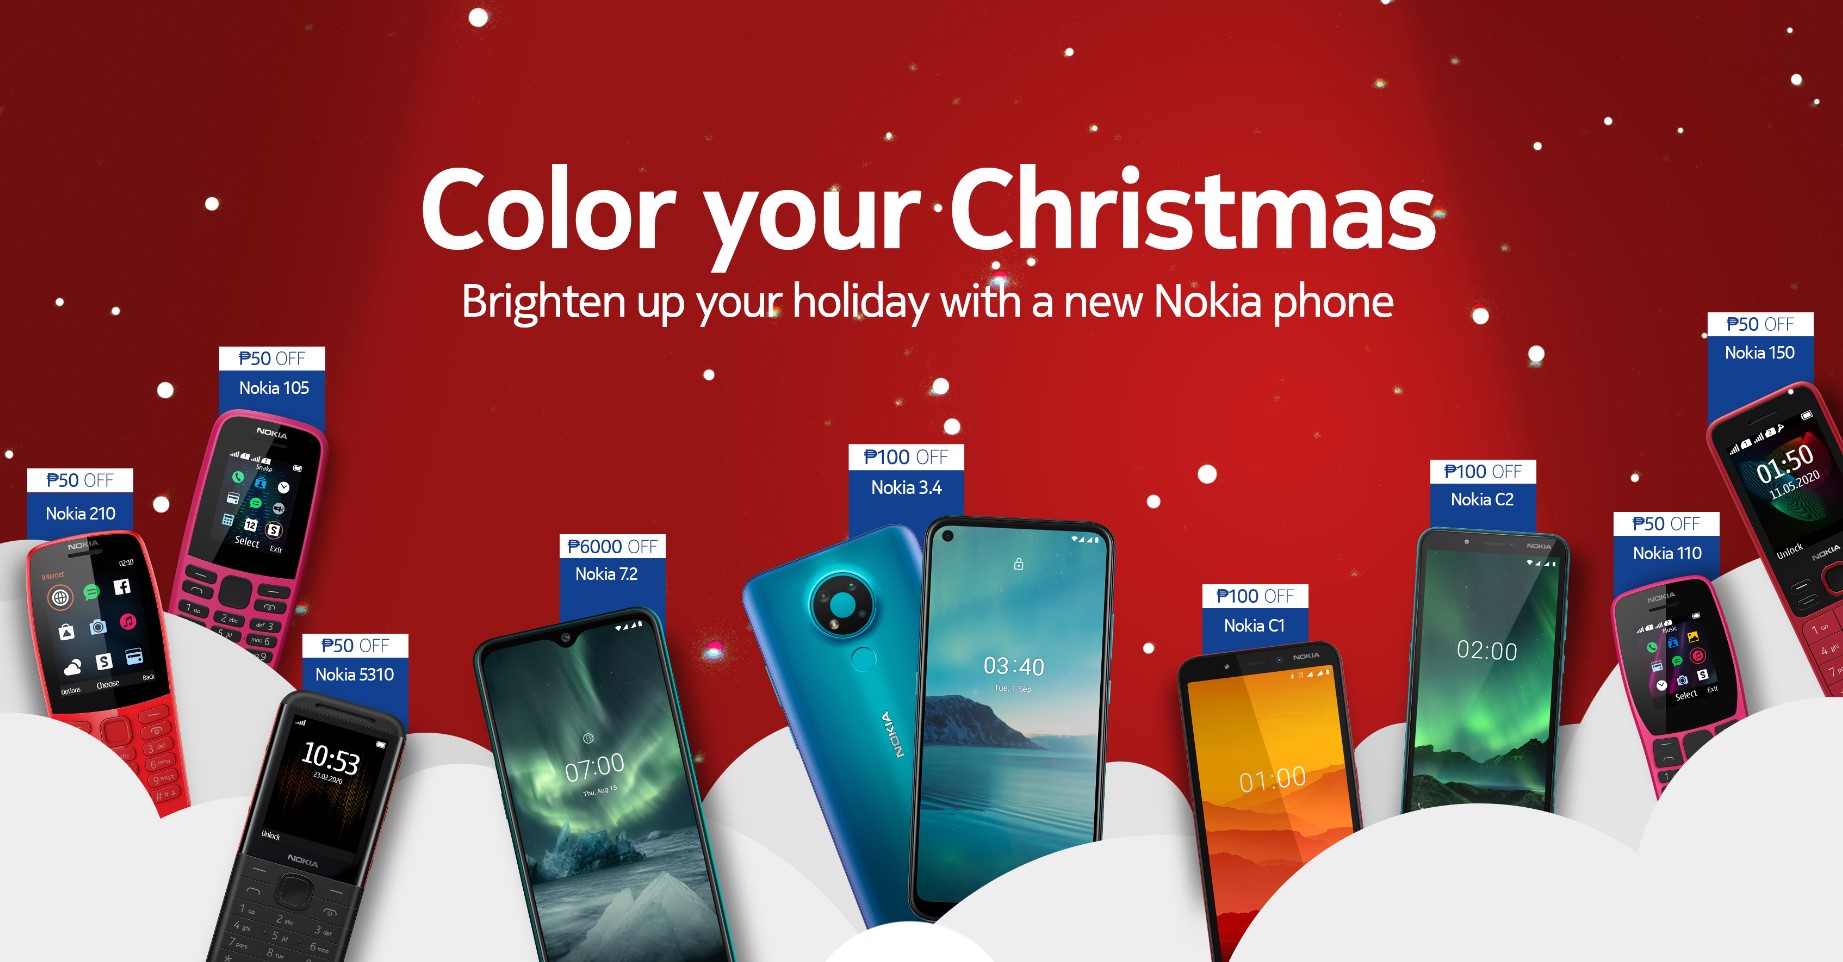 Celebrate your Christmas with exciting promos on Nokia phones for the